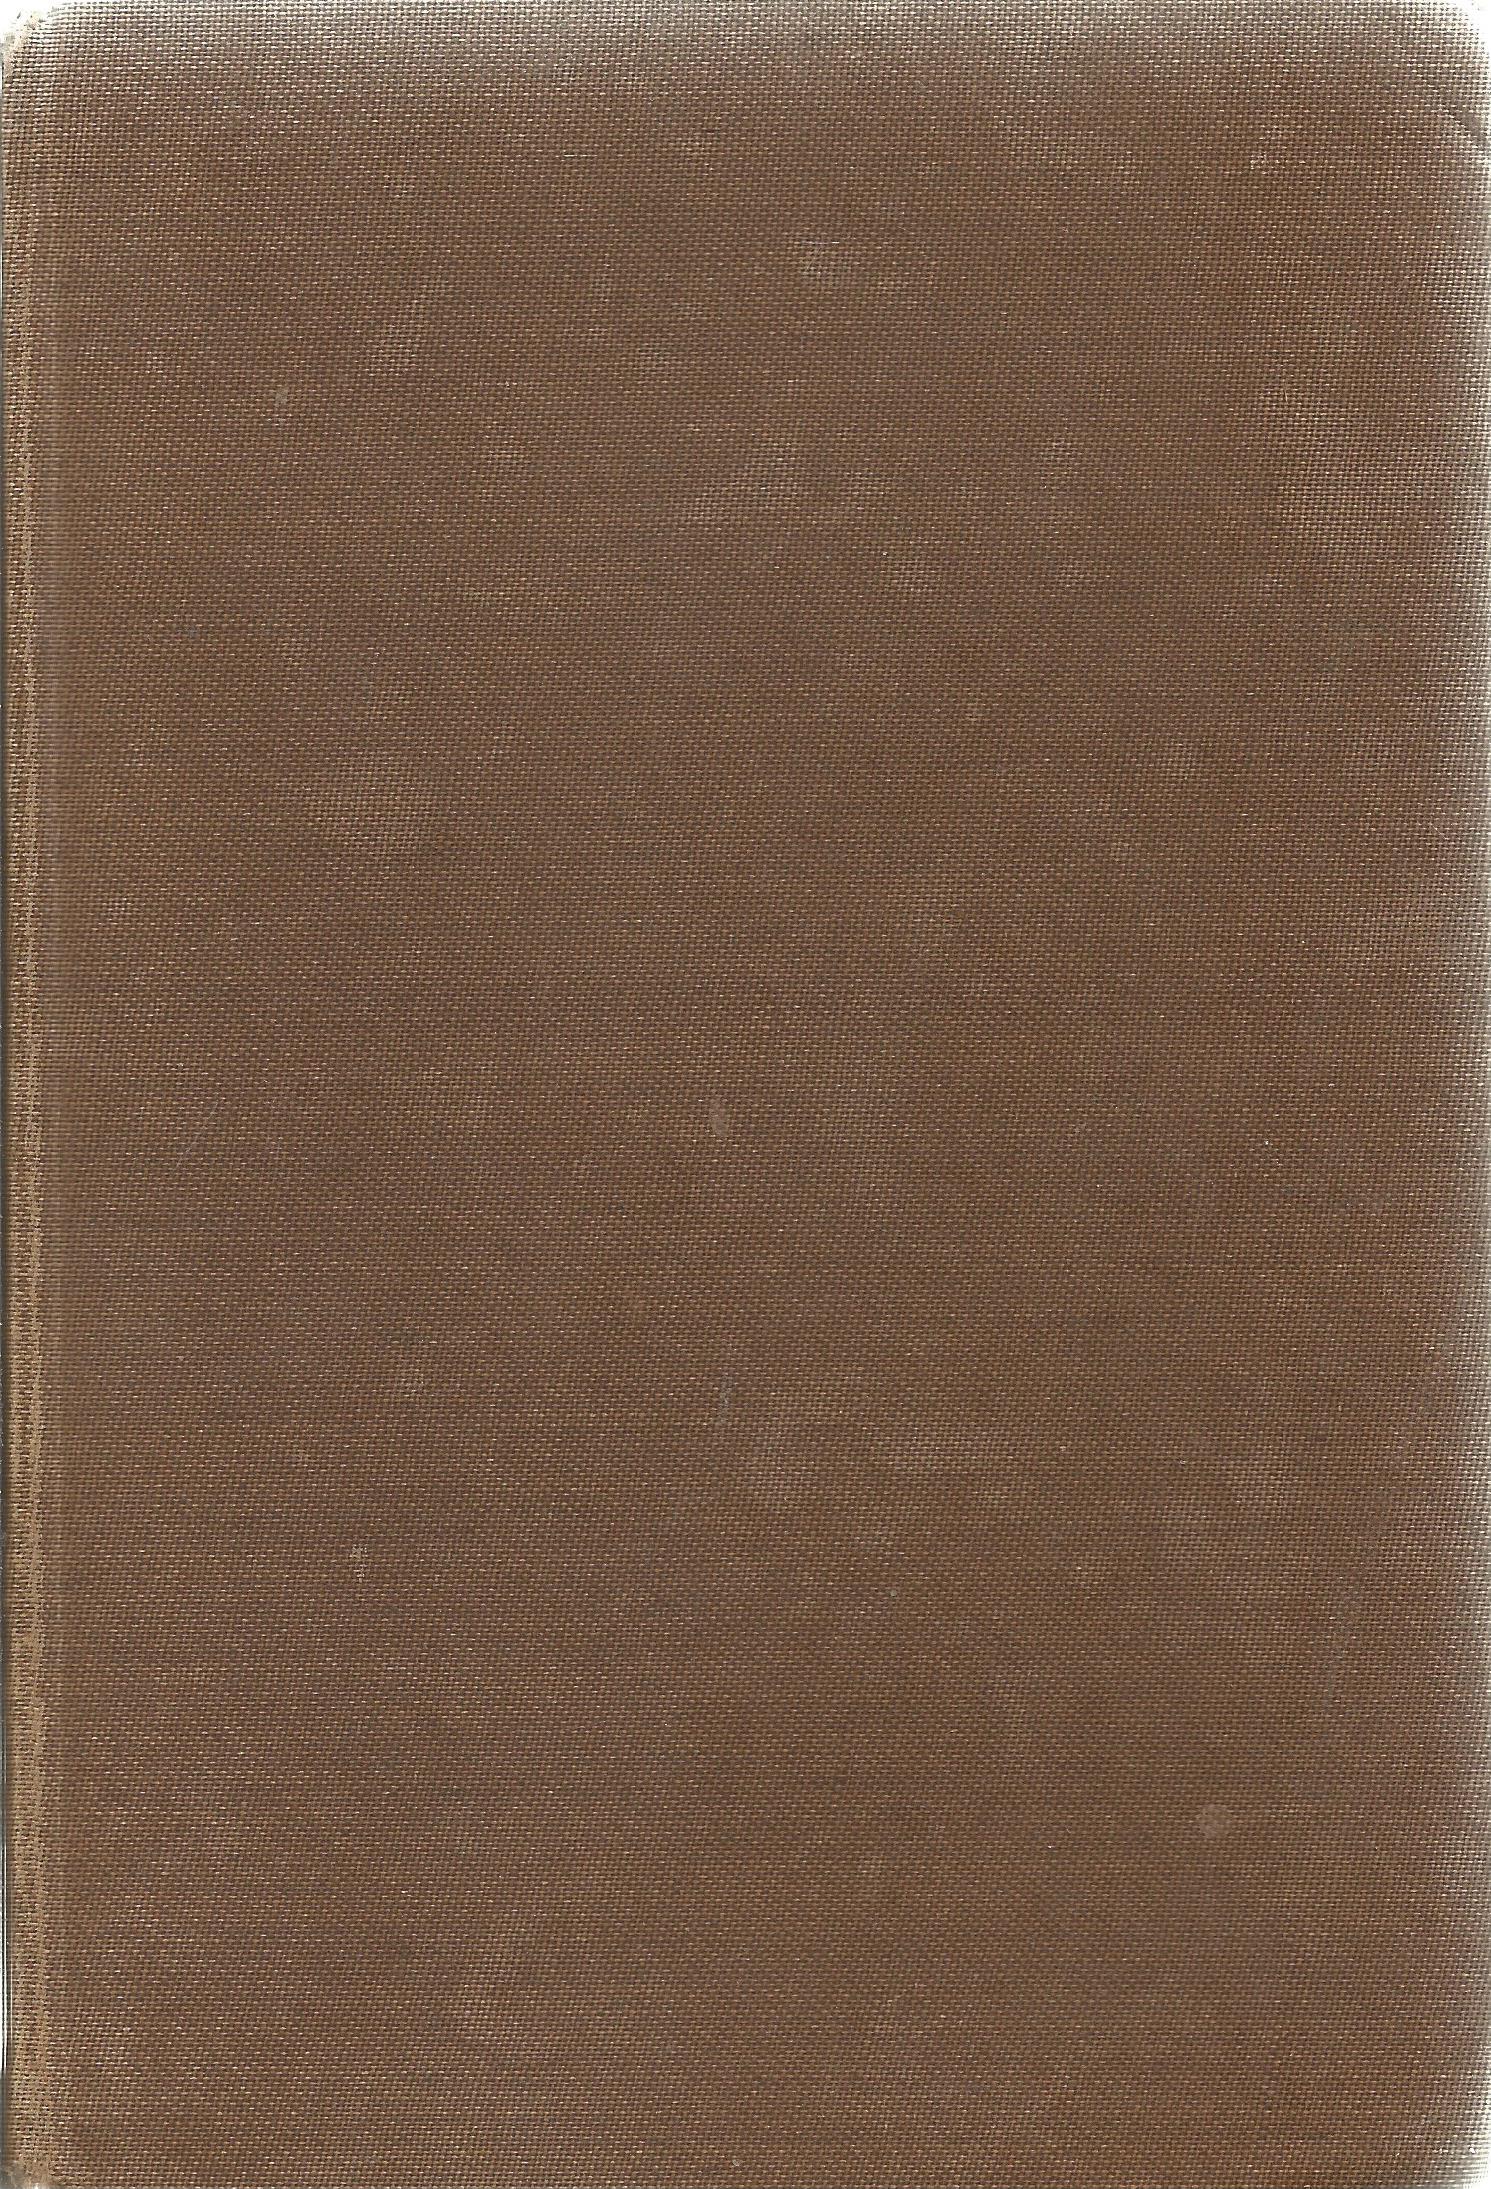 Adventures by Sea of Edward Coxere edited by E H W Meyerstein 1945 First Edition Hardback Book